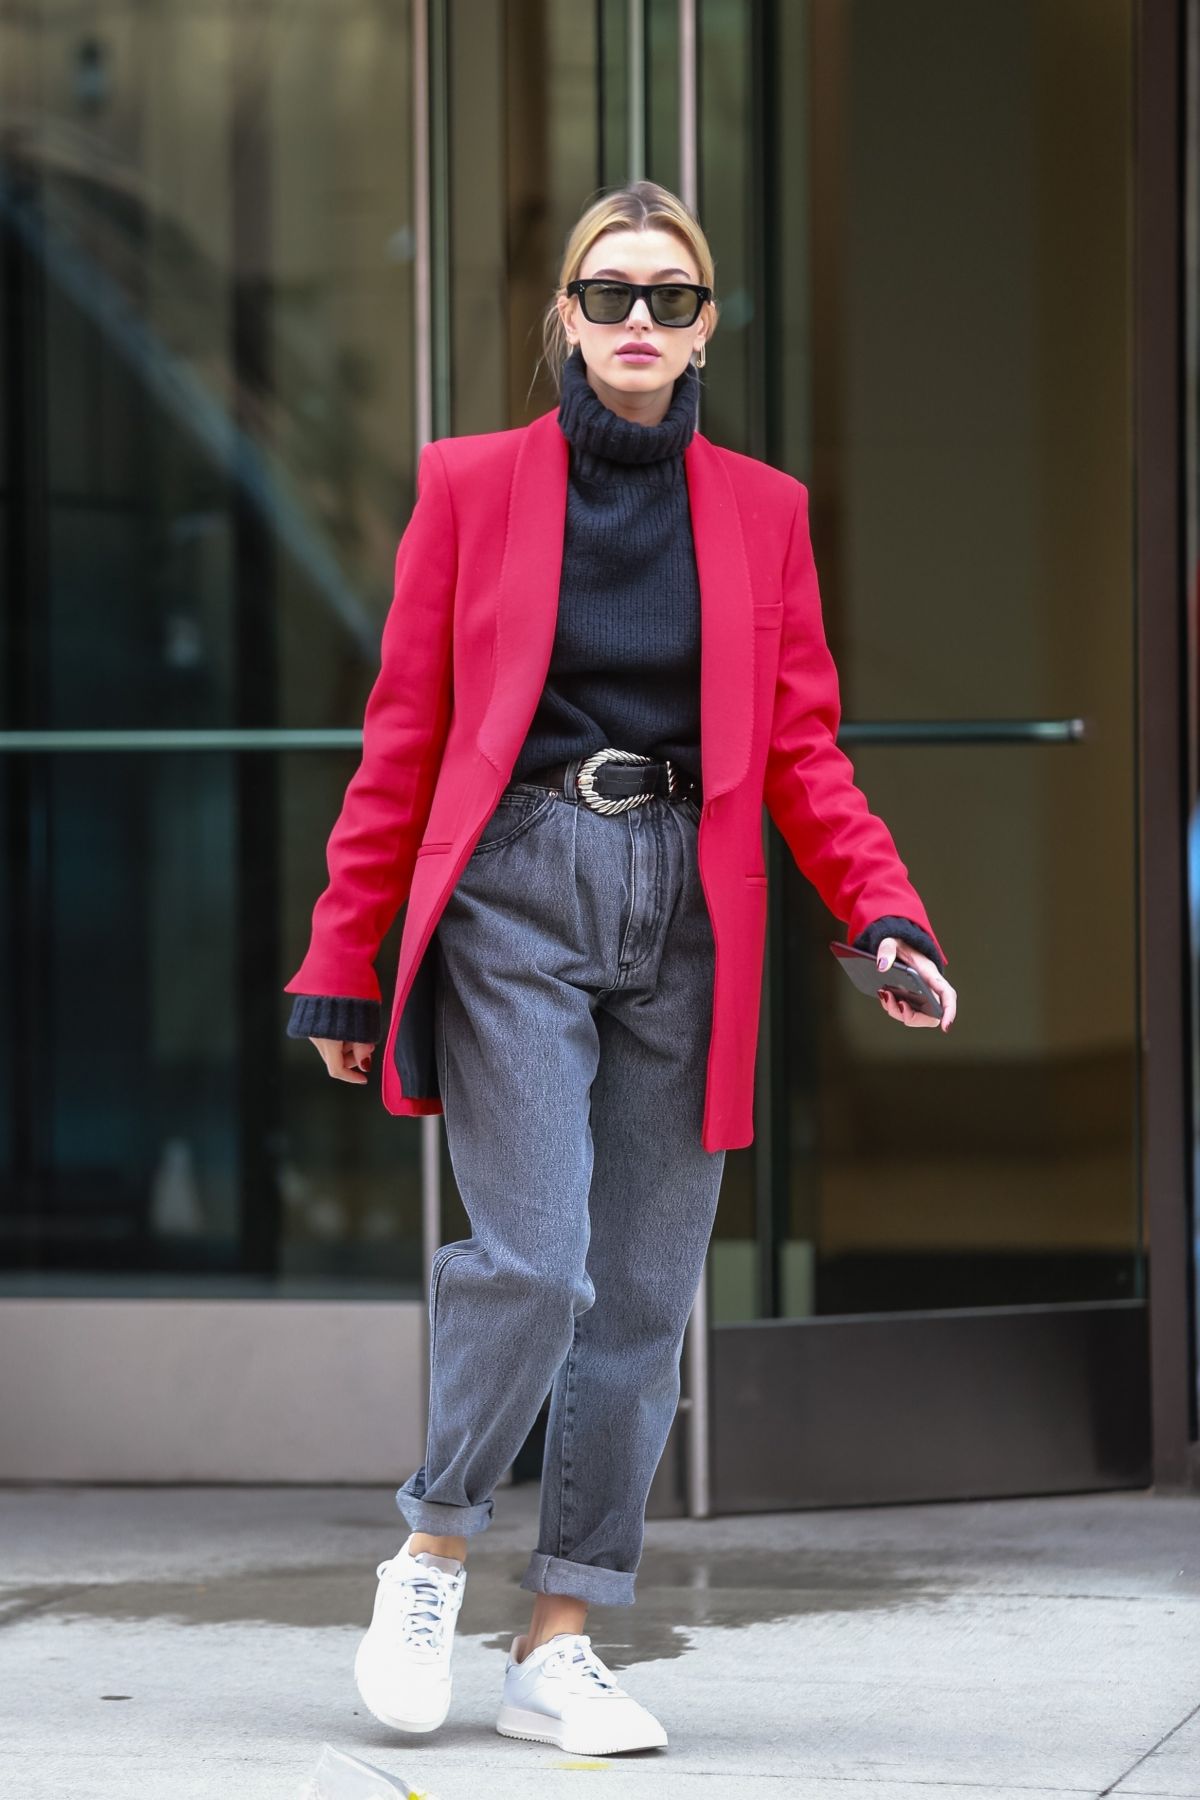 hailey-bieber-out-and-about-in-new-york-03-08-2019-7.jpg